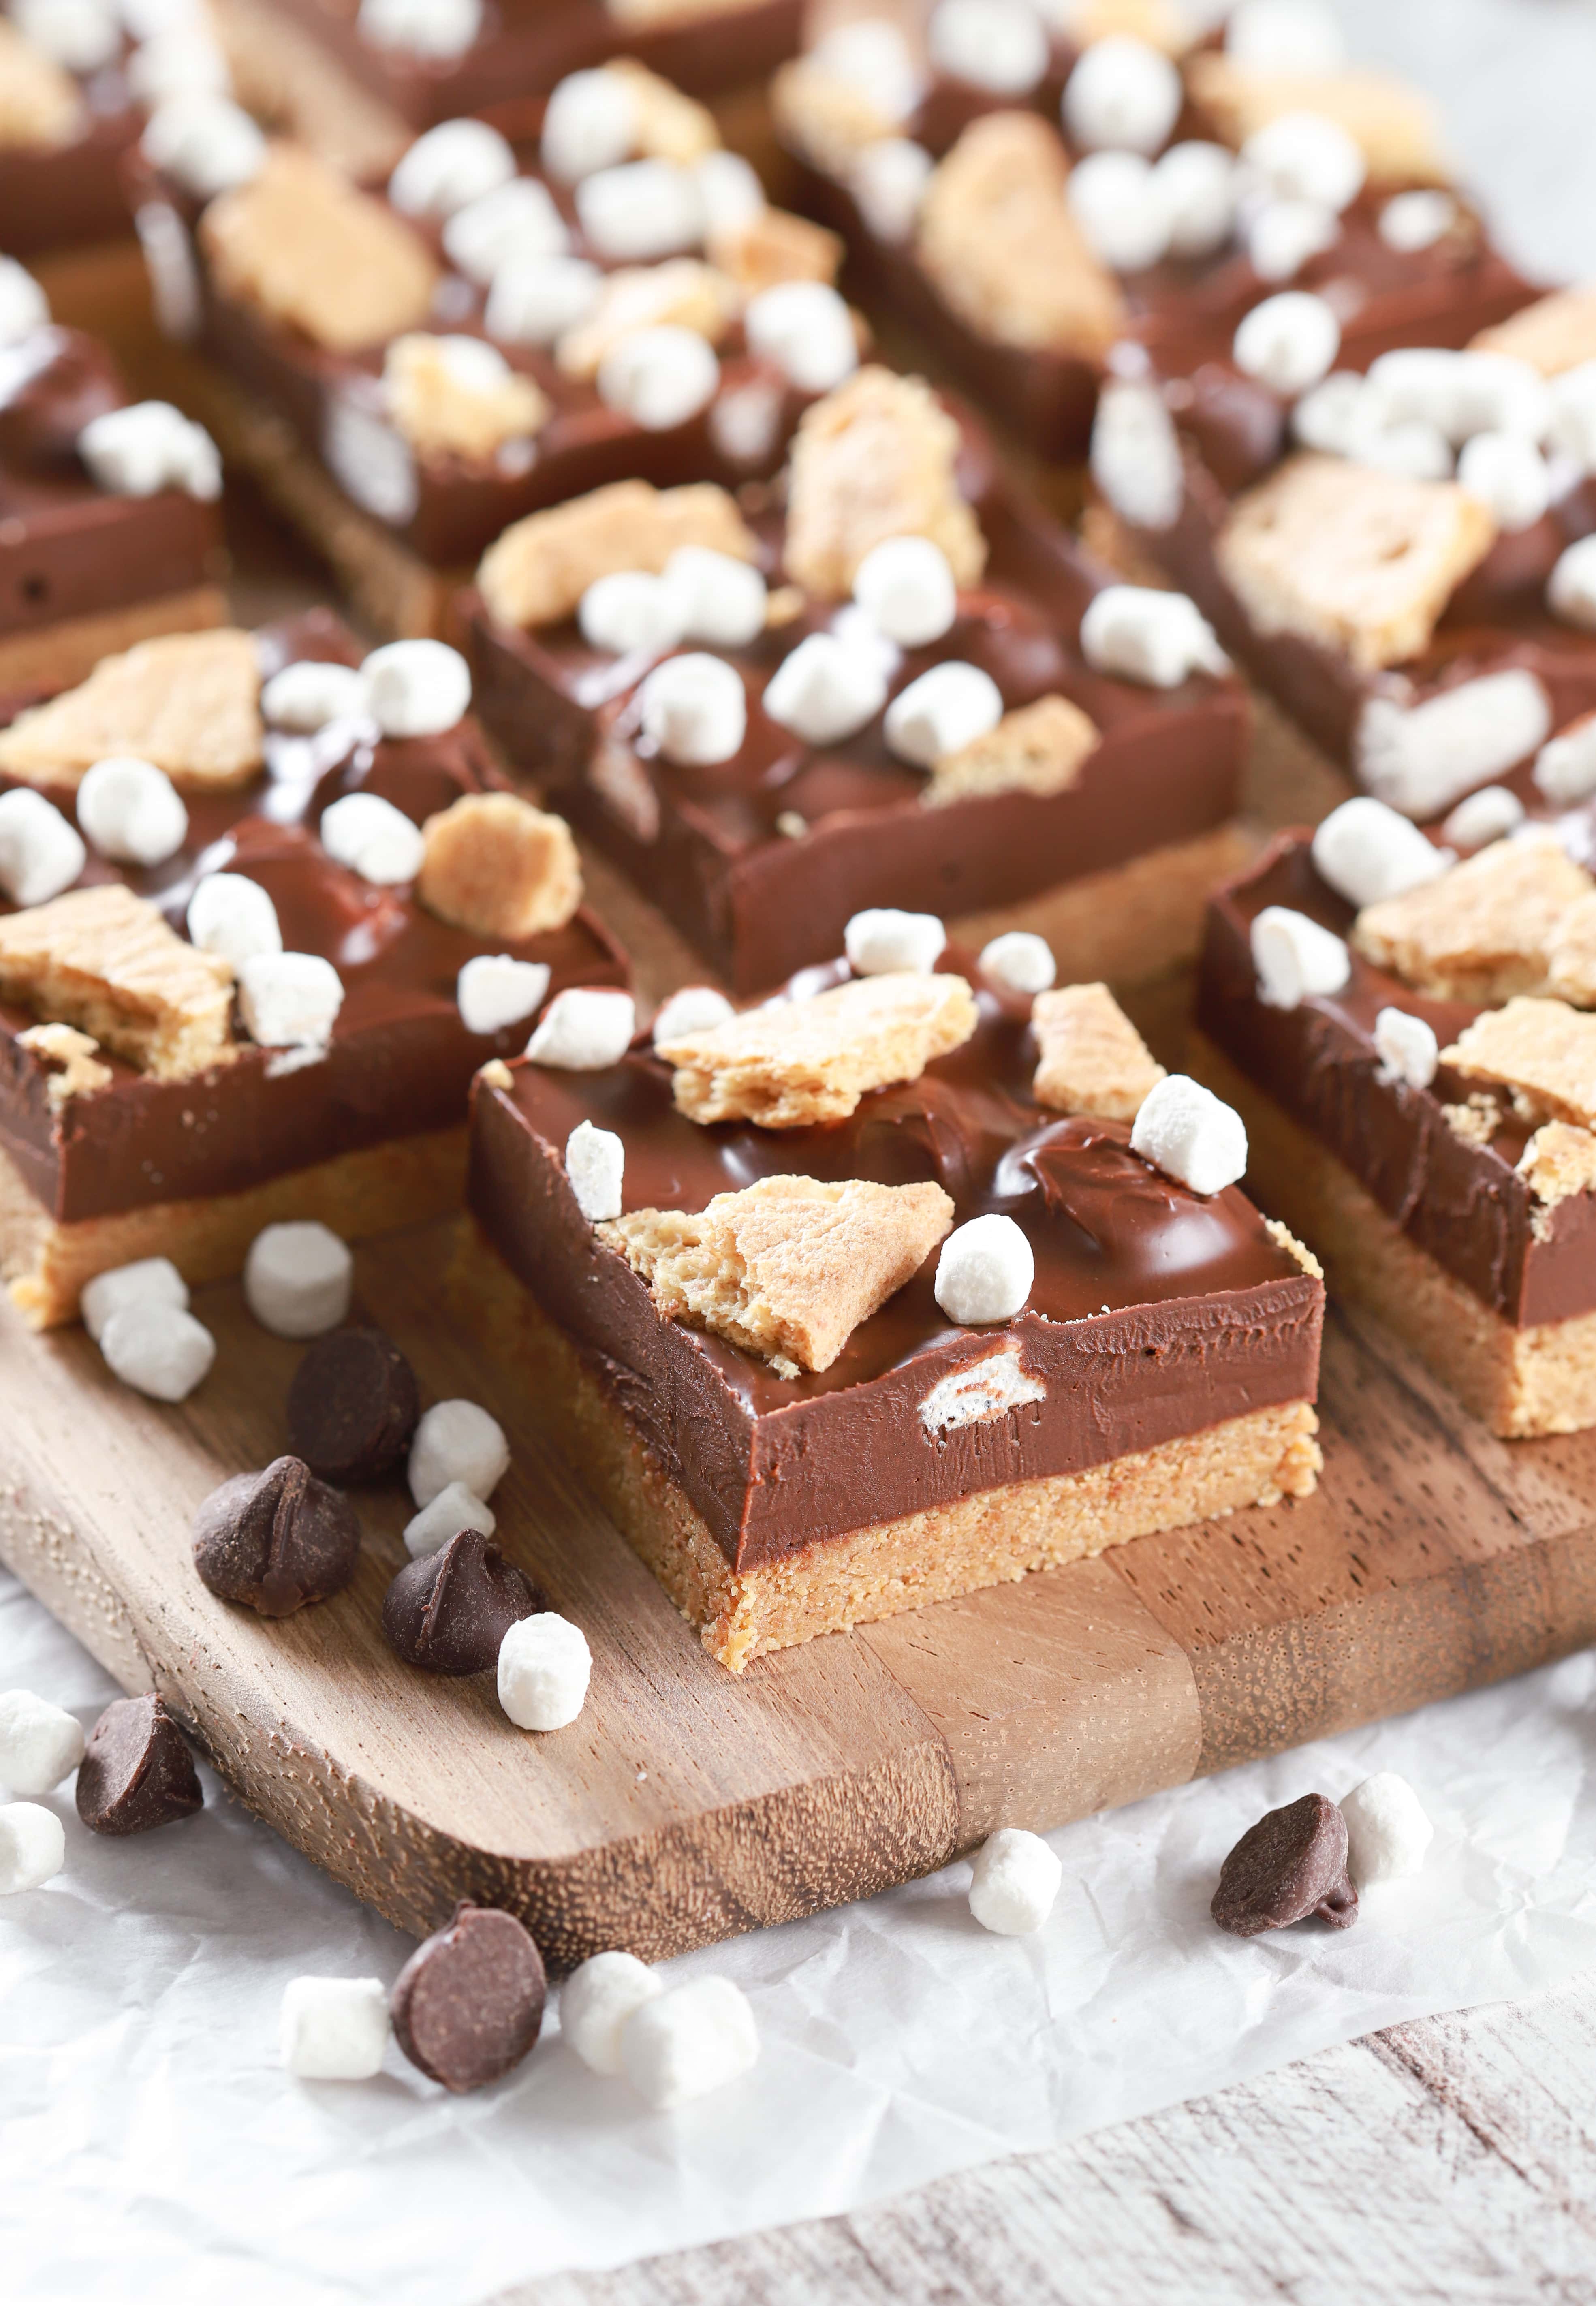 No Bake Peanut Butter Smores Bars on a wooden cutting board